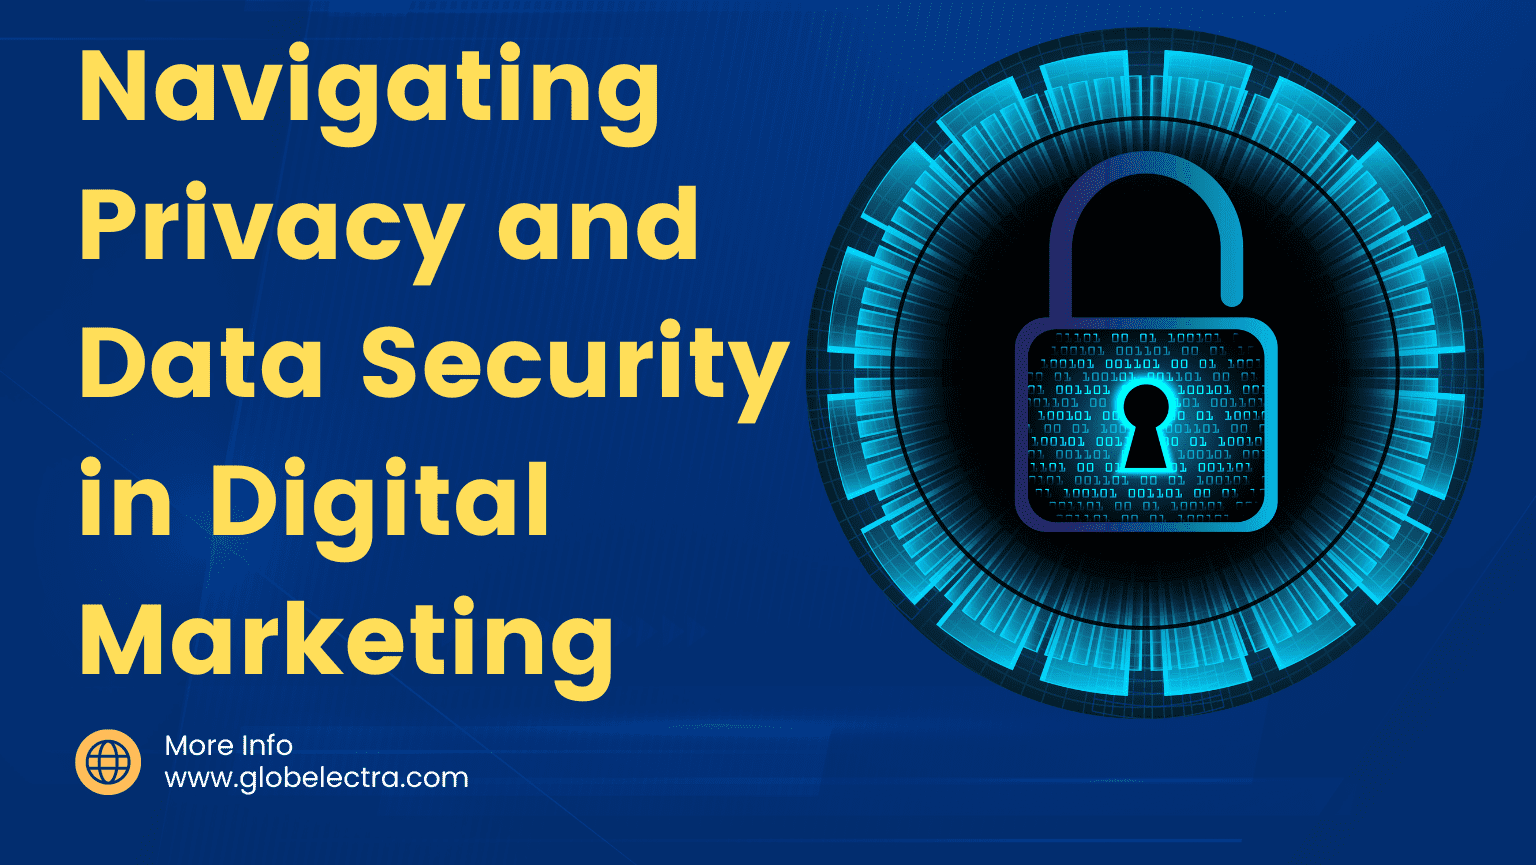 Navigating Privacy and Data Security in Digital Marketing